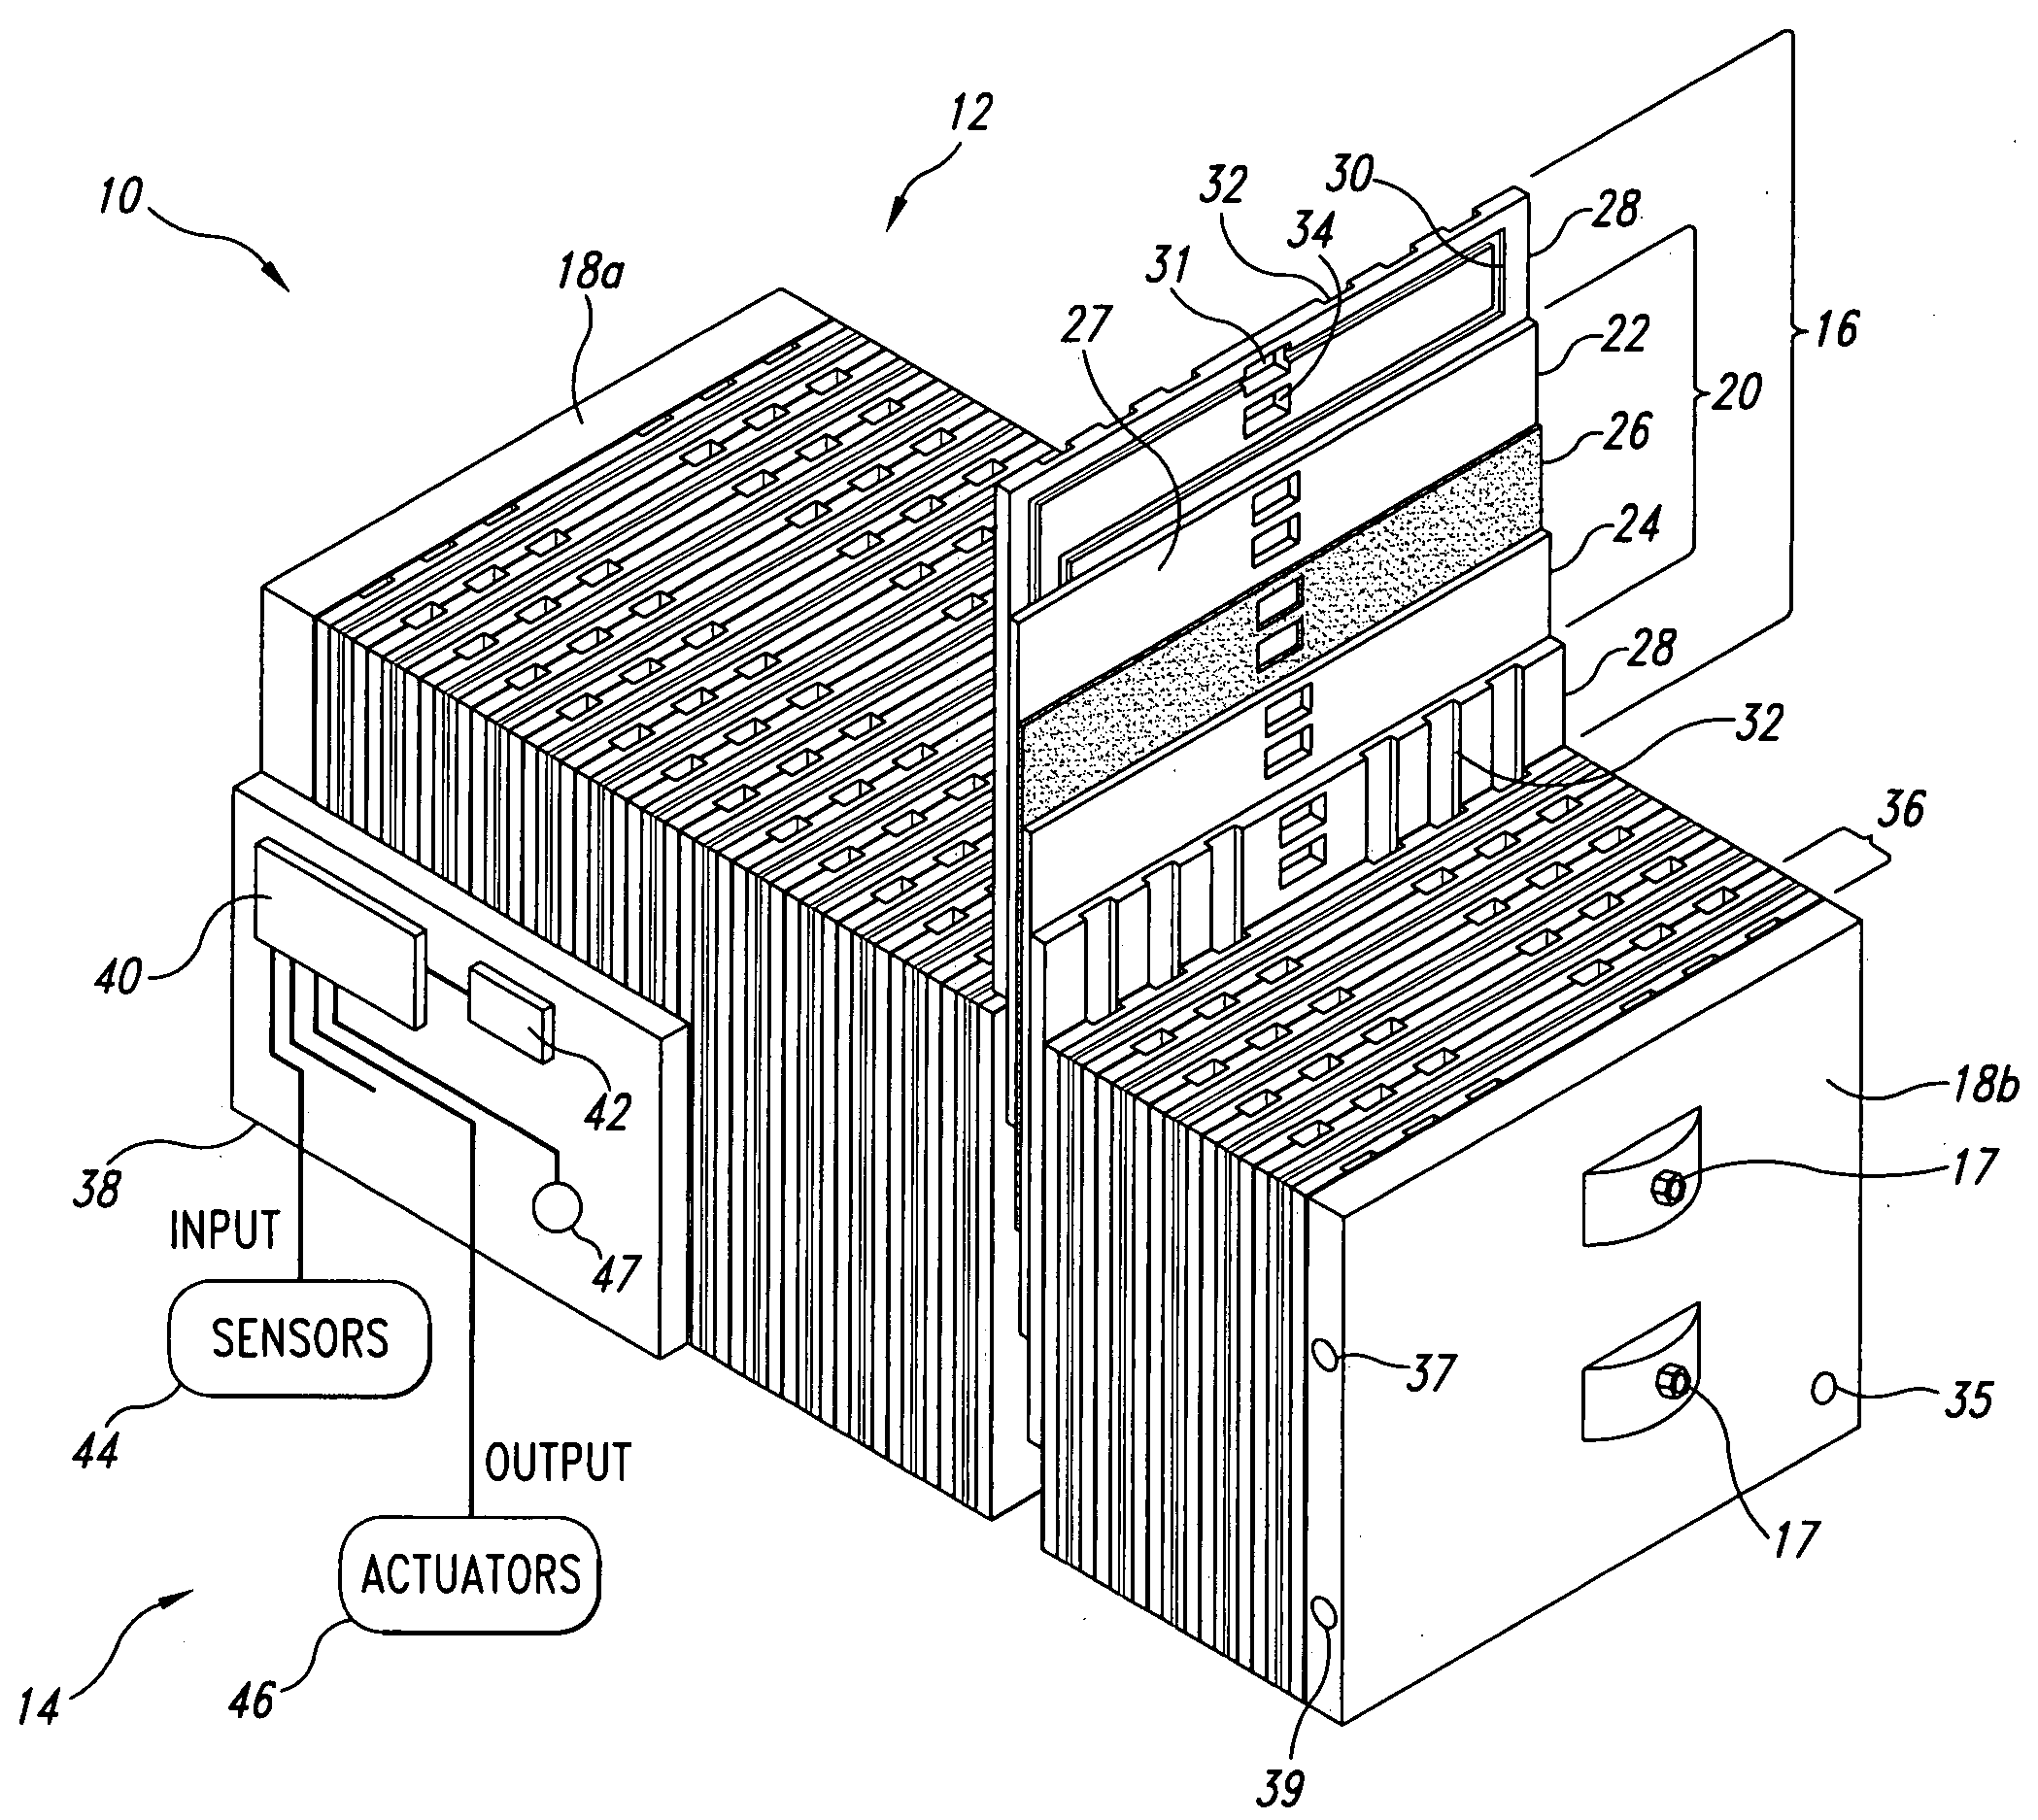 Fuel cell system method, apparatus and scheduling